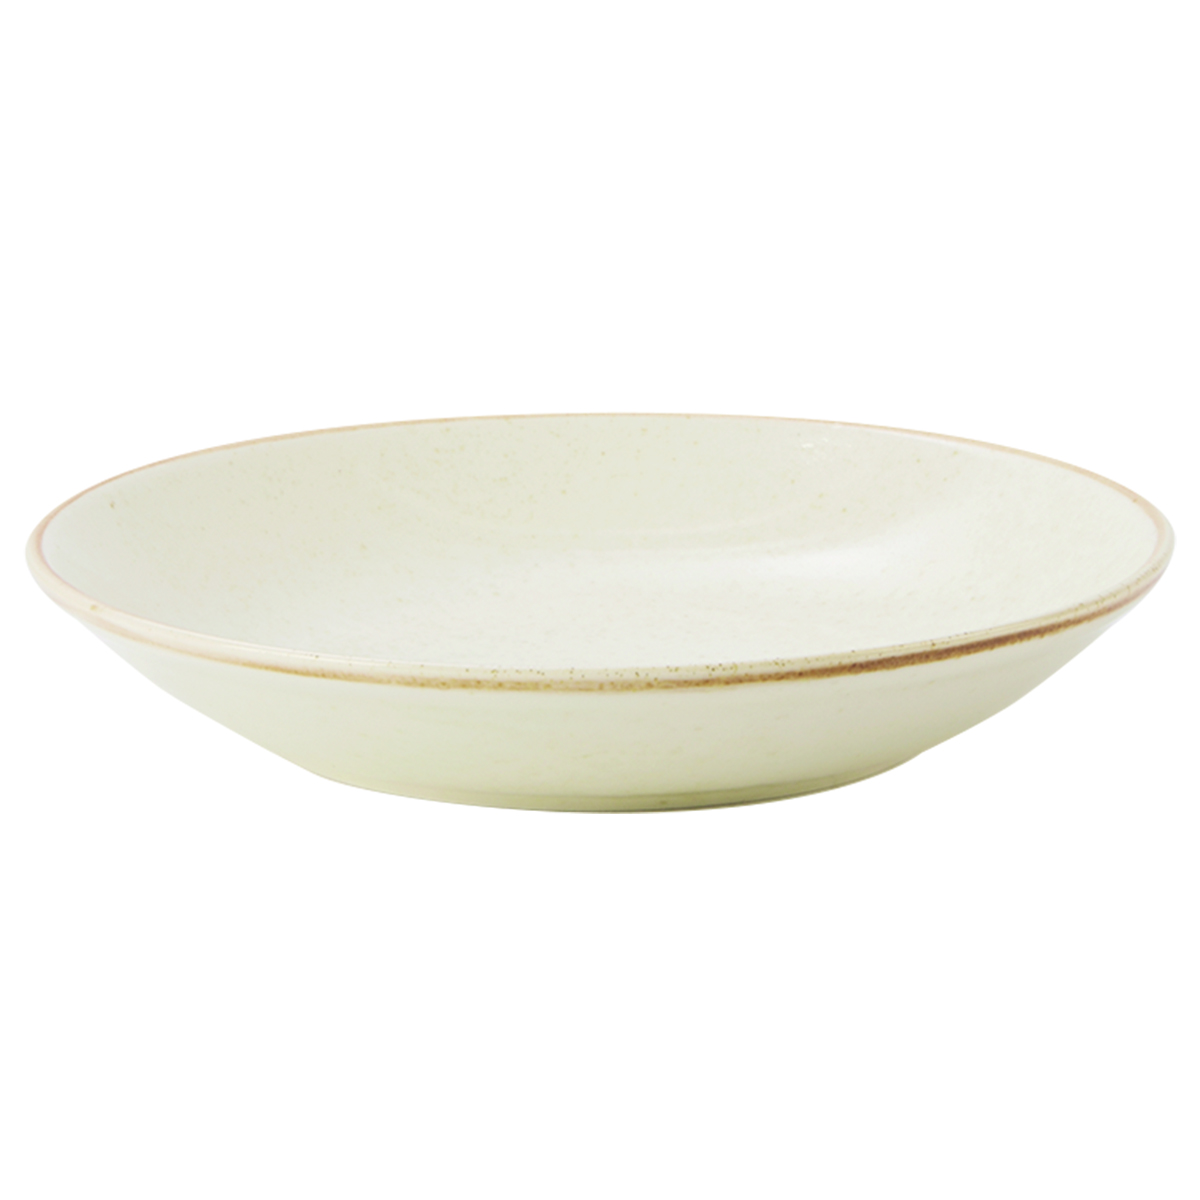 Teller tief coupe 26cm - Oatmeal